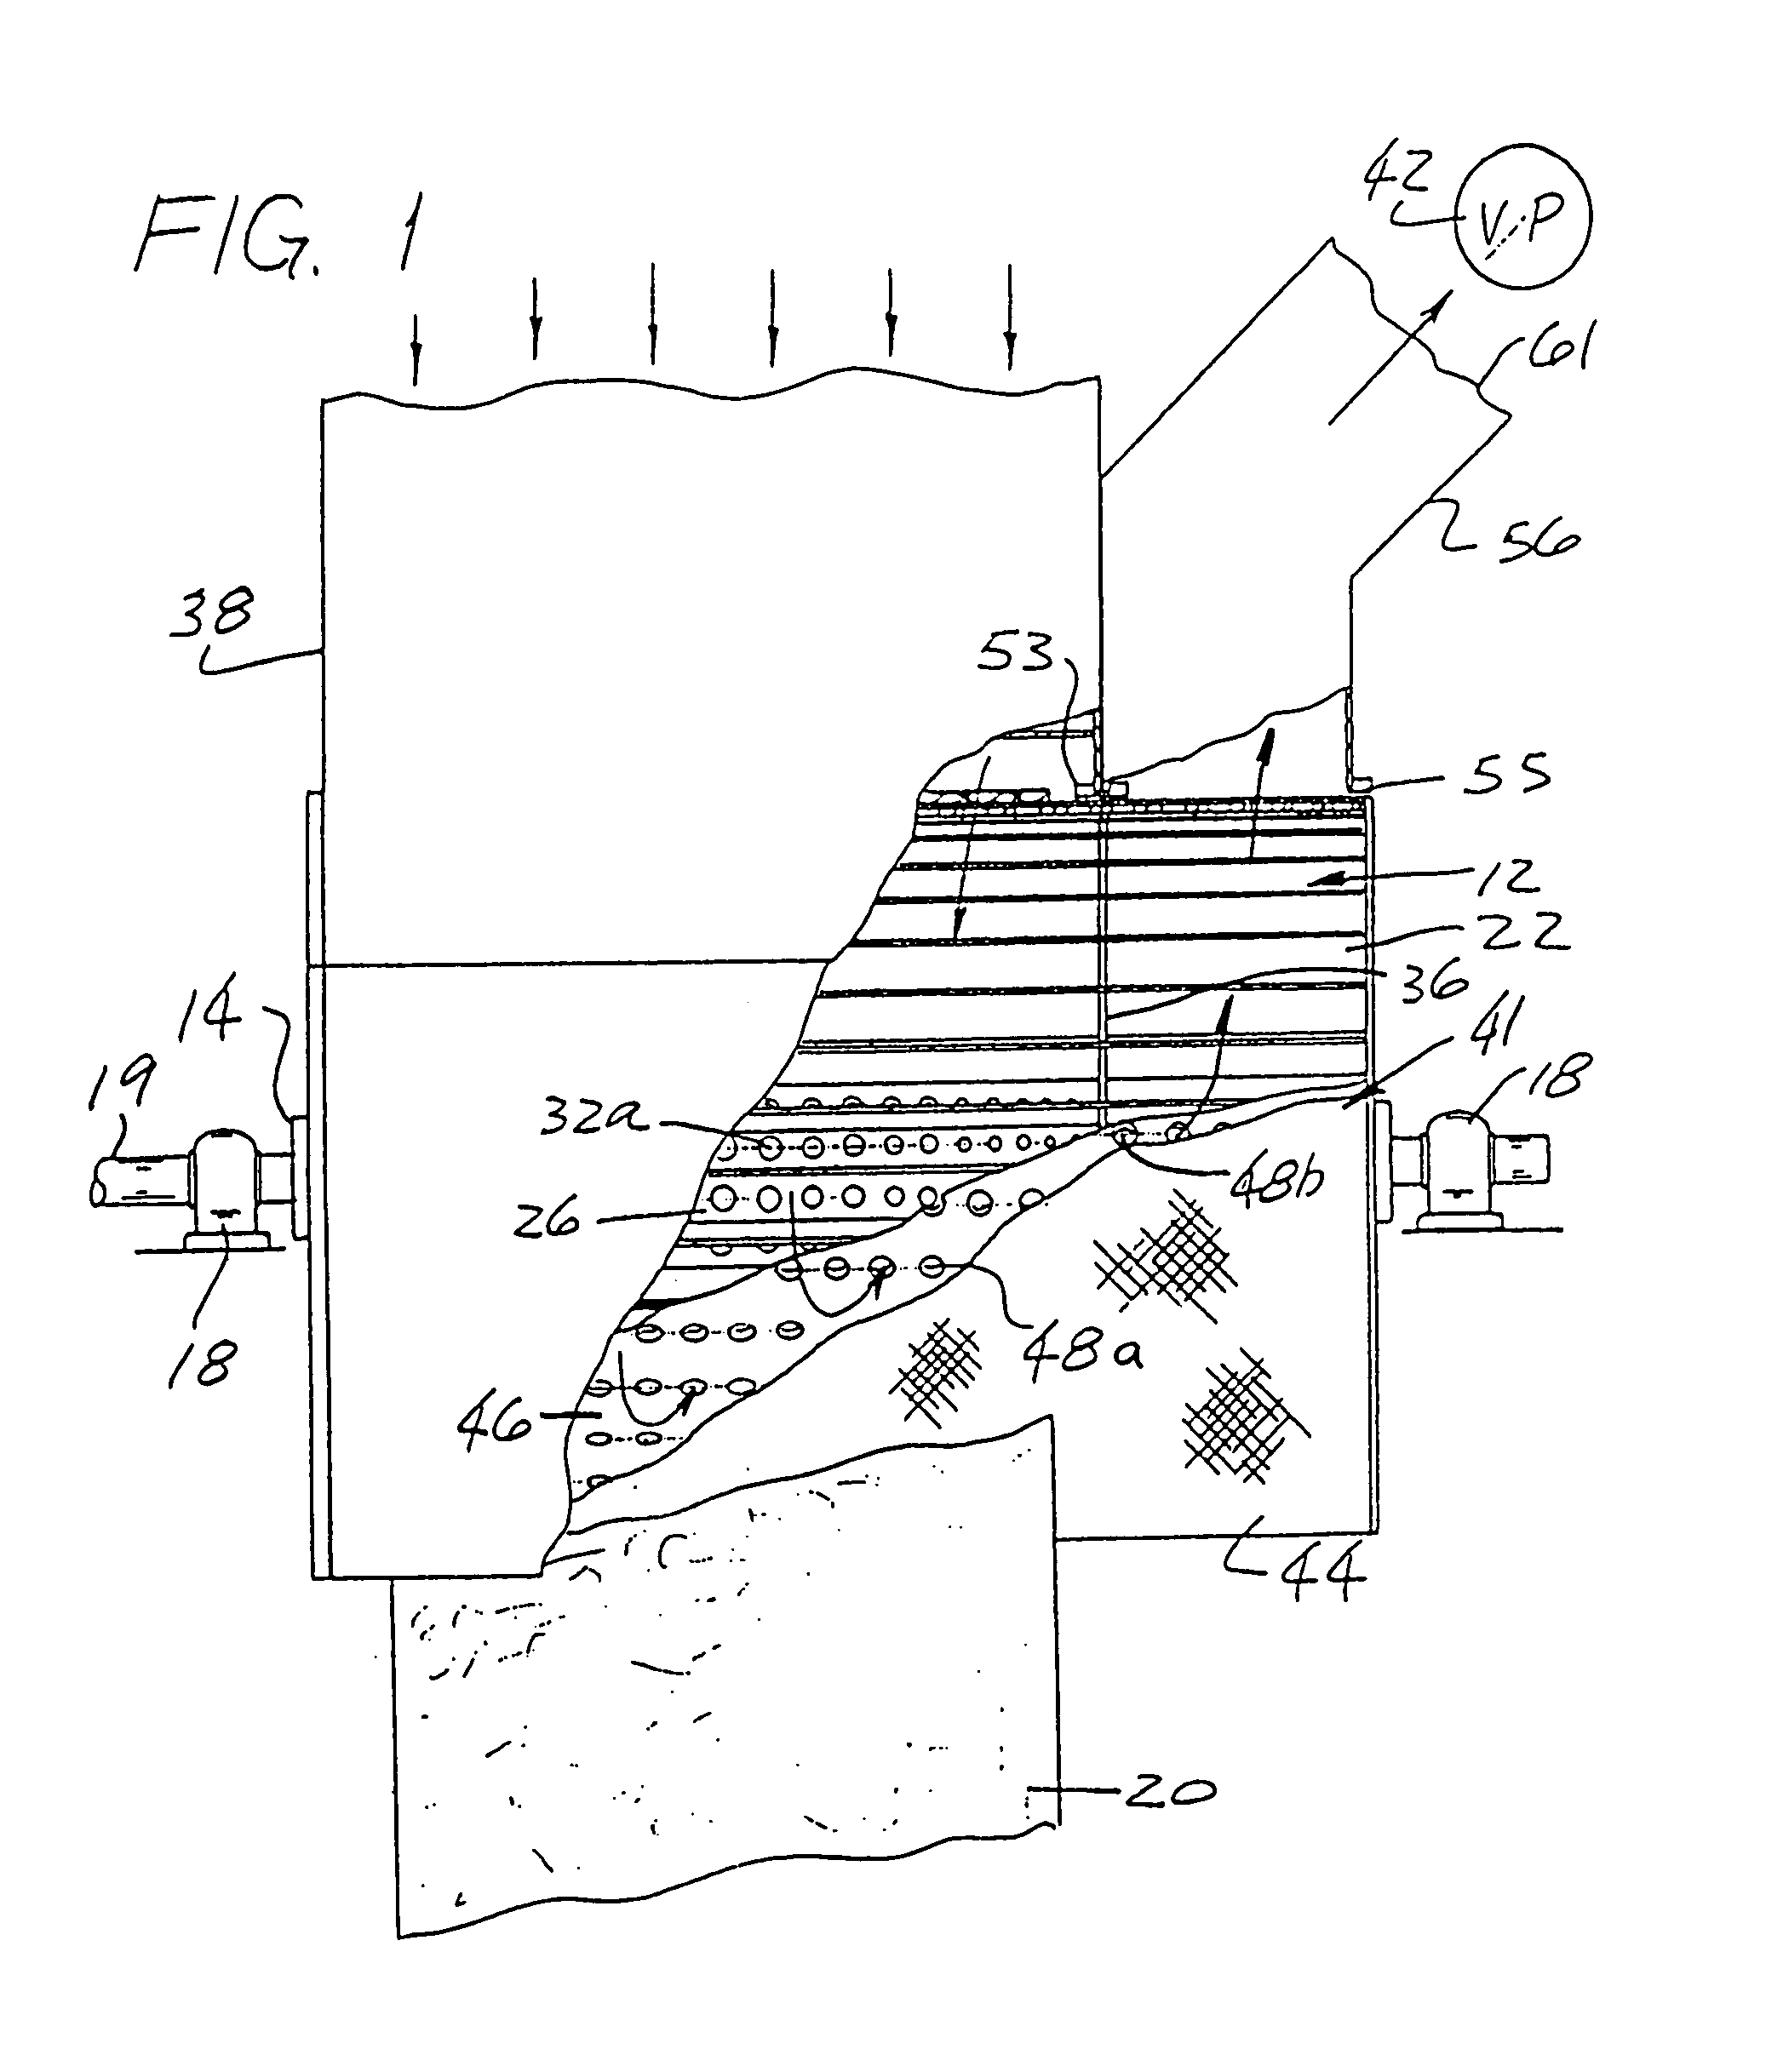 Apparatus for processing permeable or semi-permeable webs